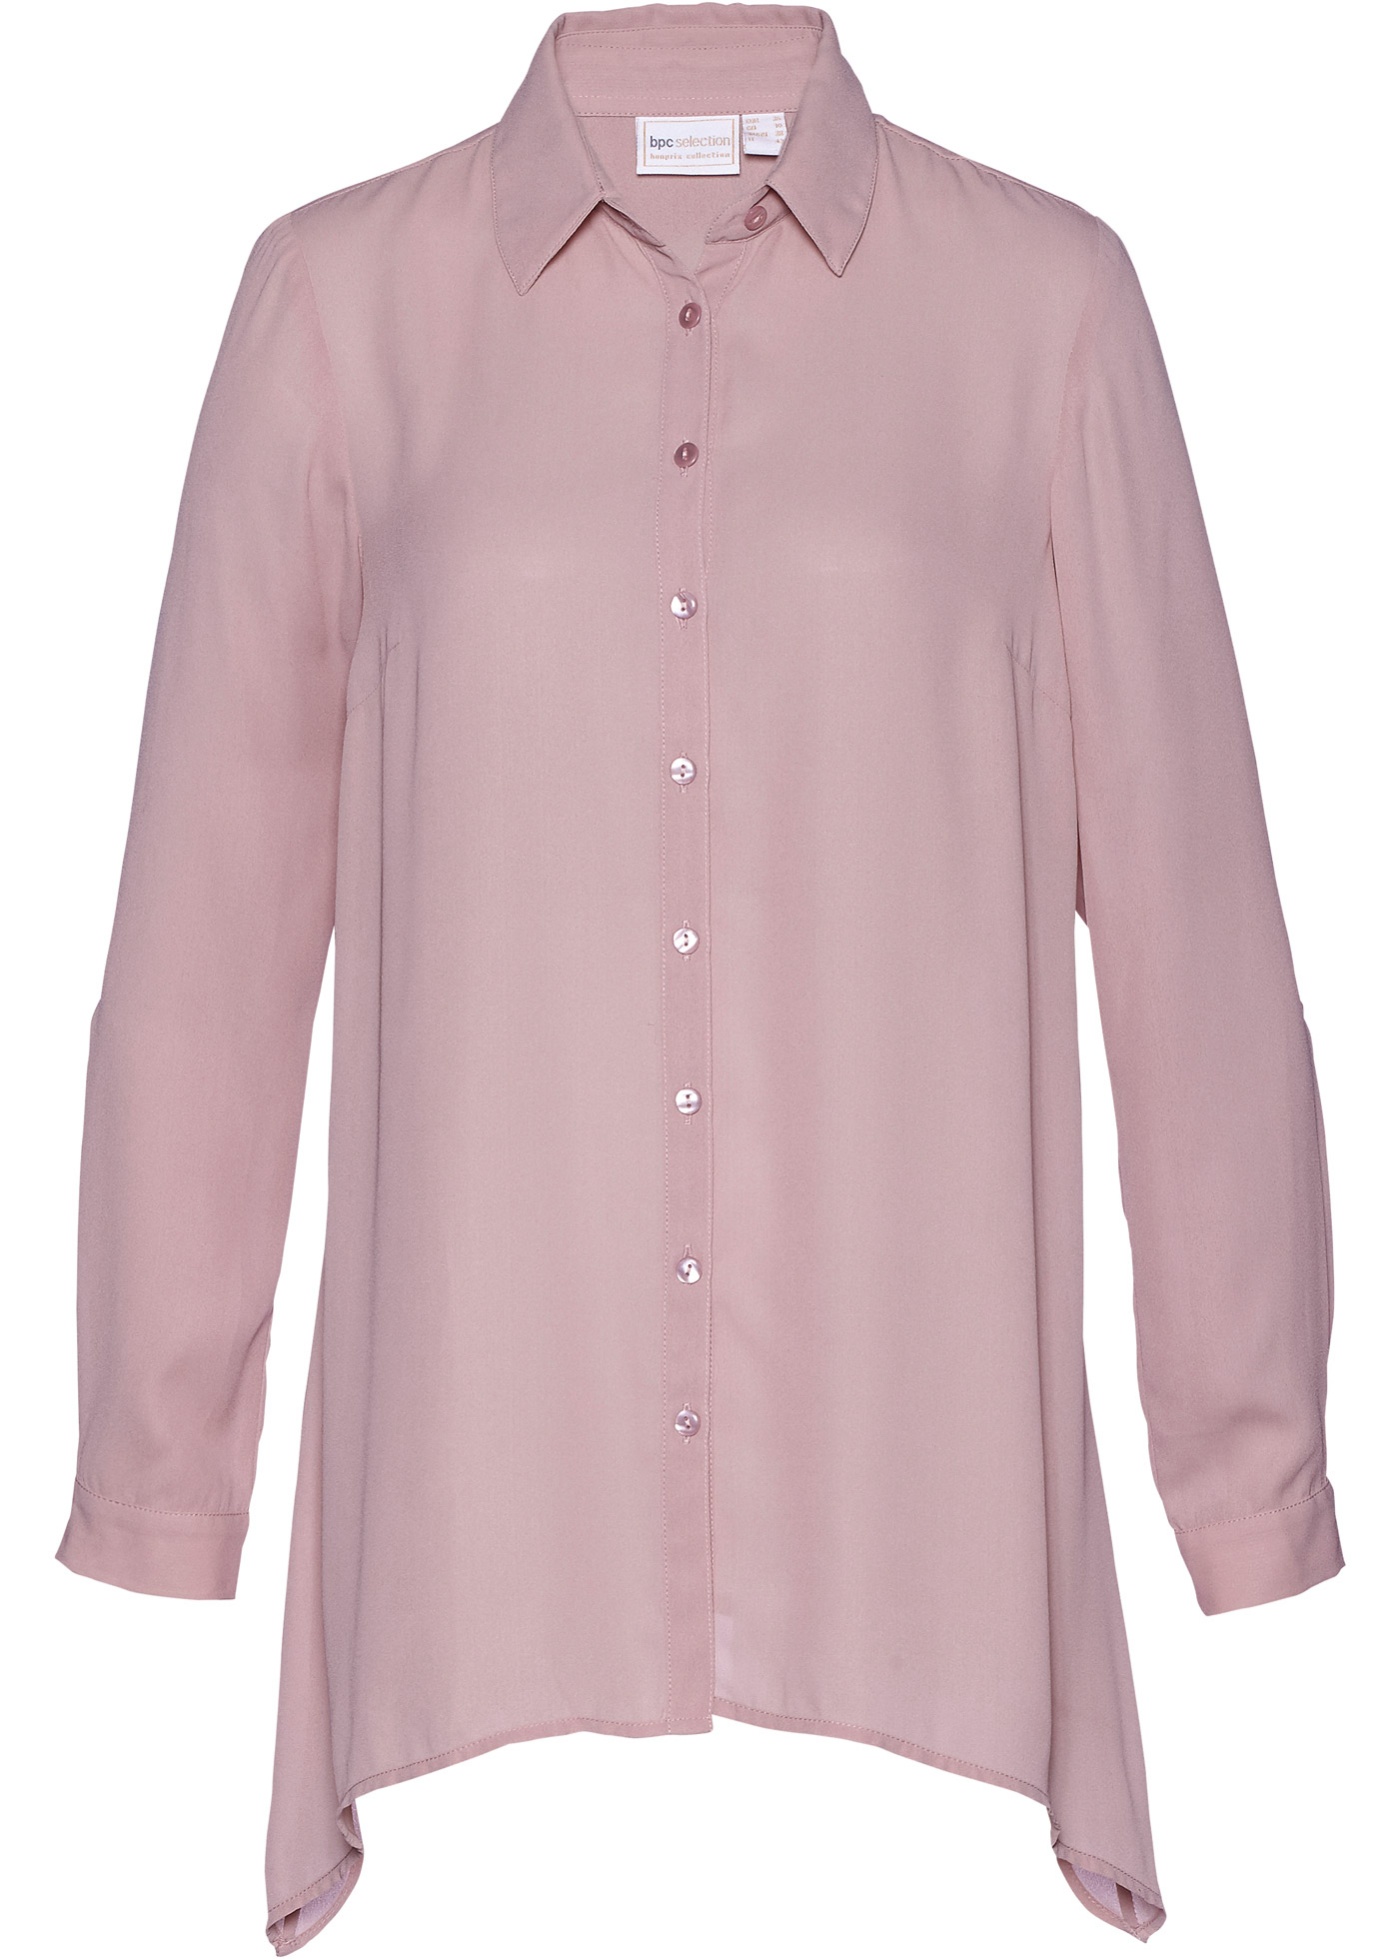 Bequeme Longbluse (92430195) in rosenholz